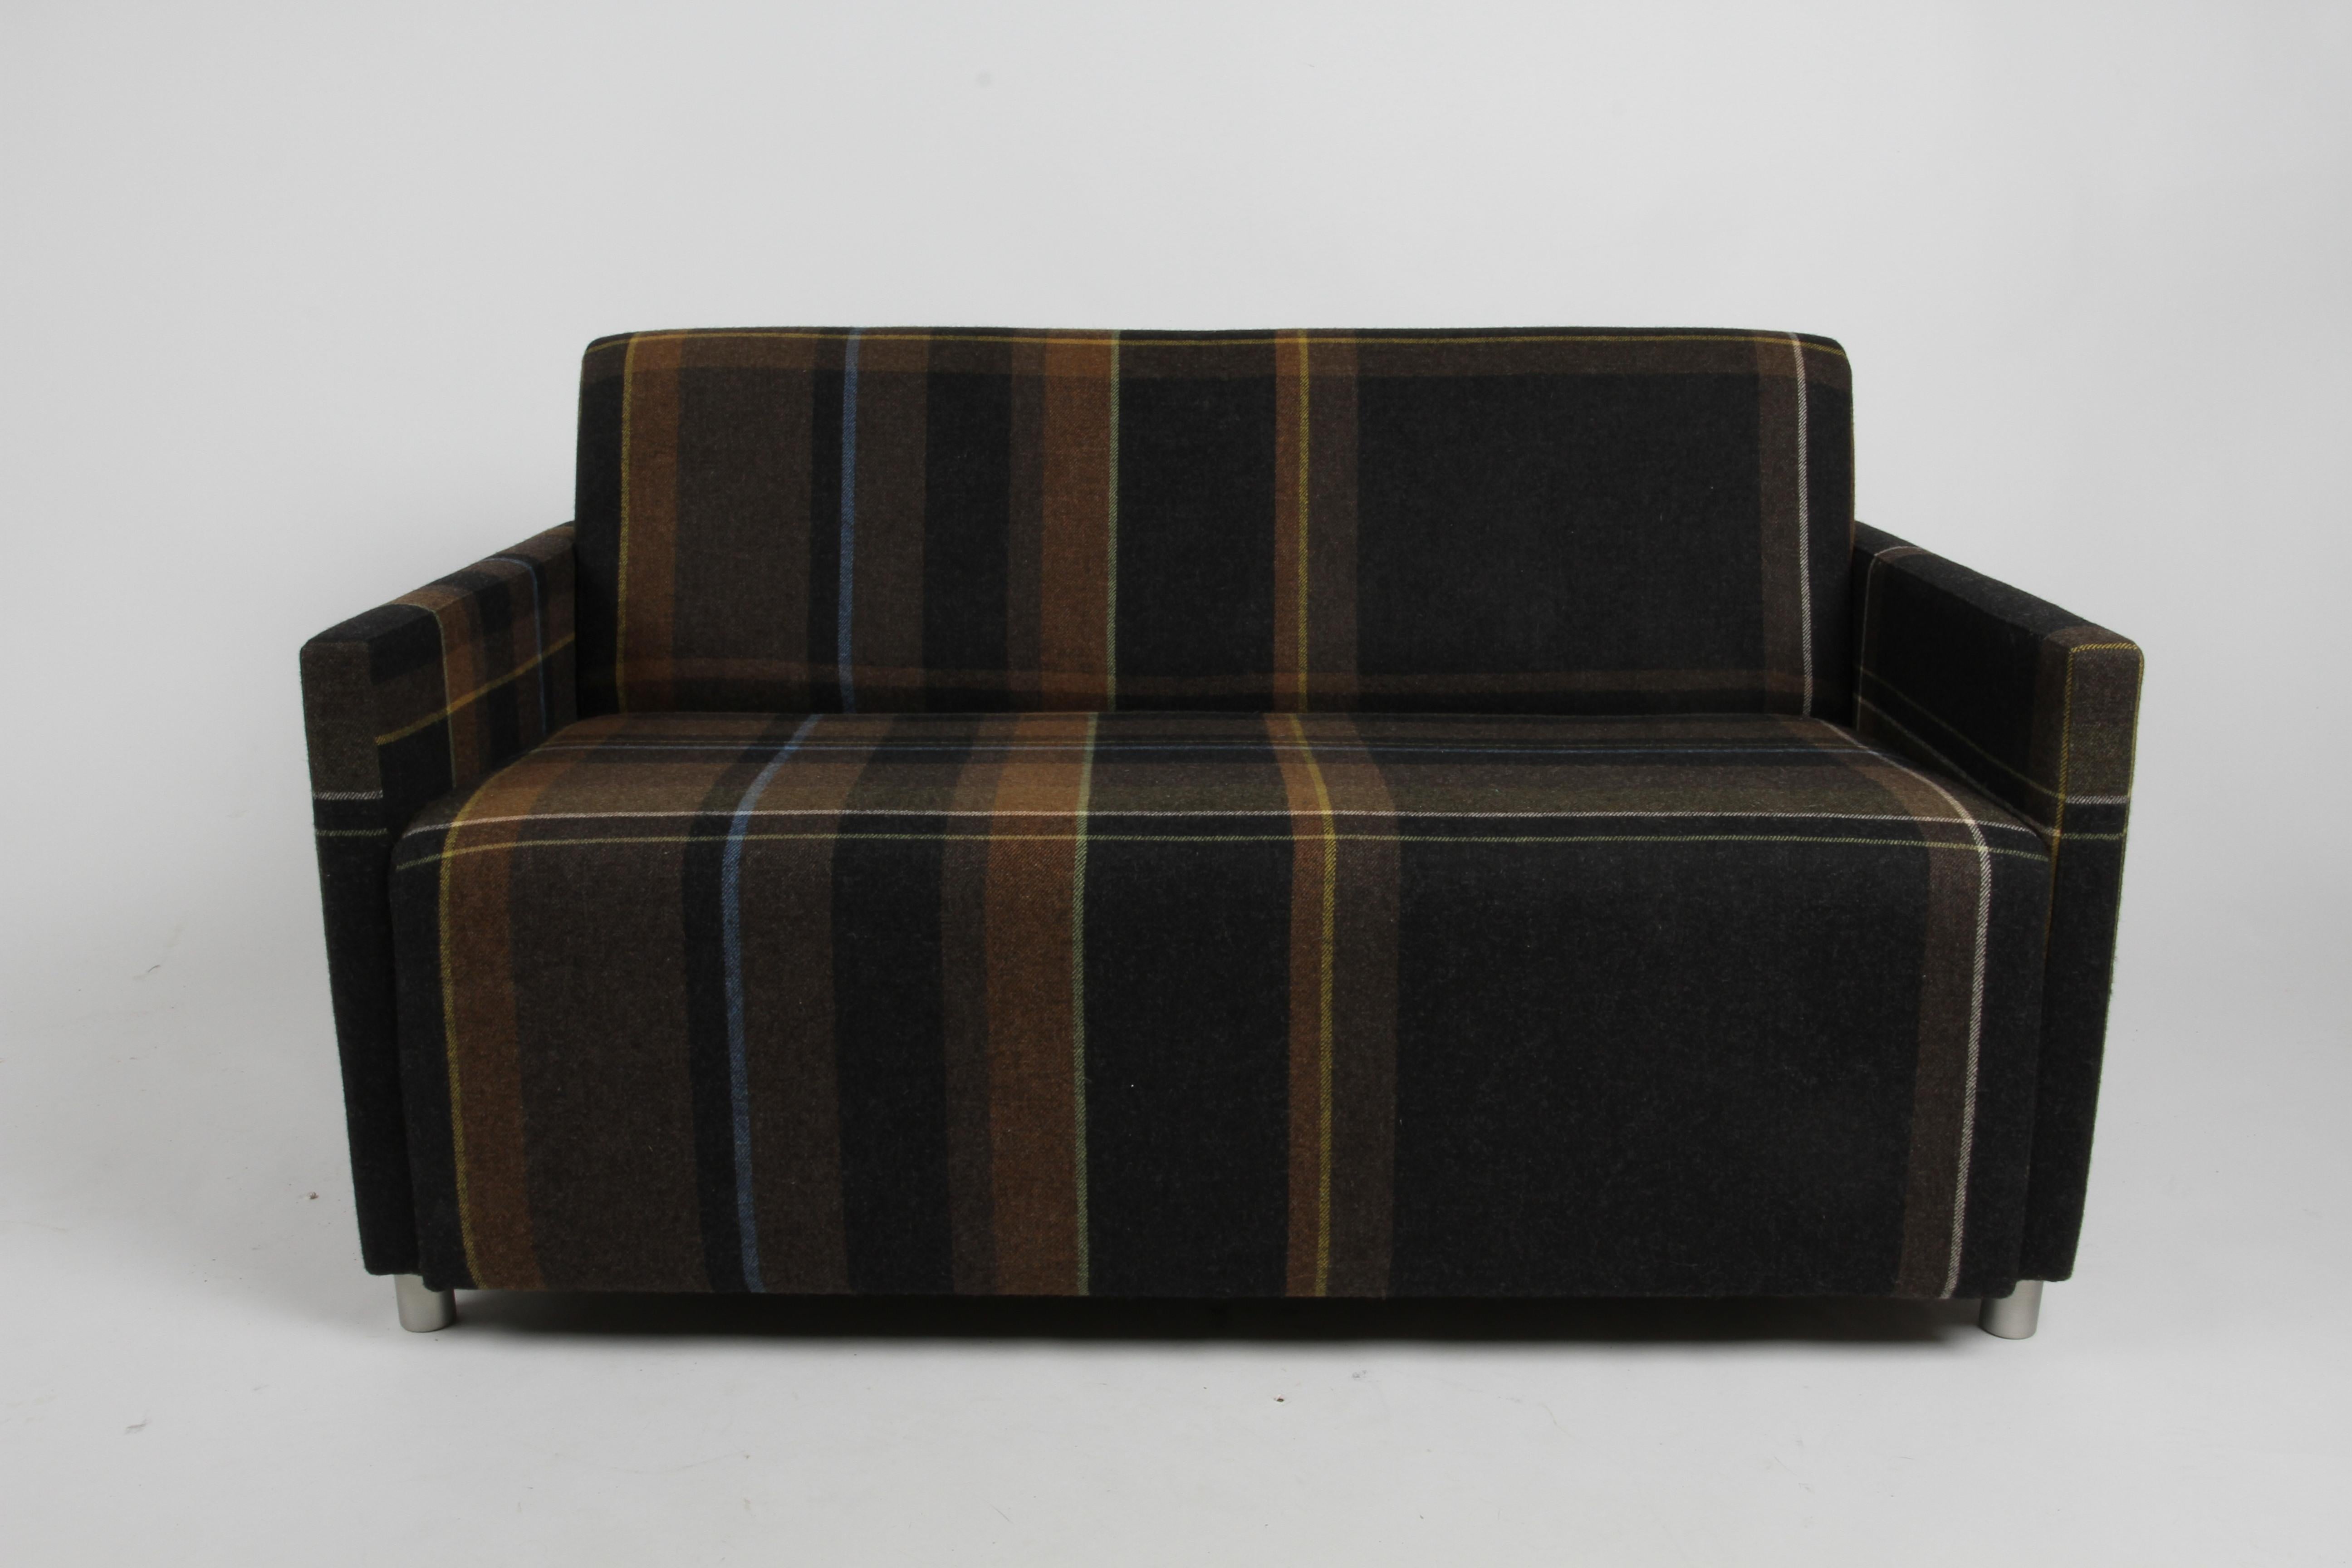 Modern Coalesse Settee Upholstered in Paul Smith by Maharam Exaggerated Wool Plaid  For Sale